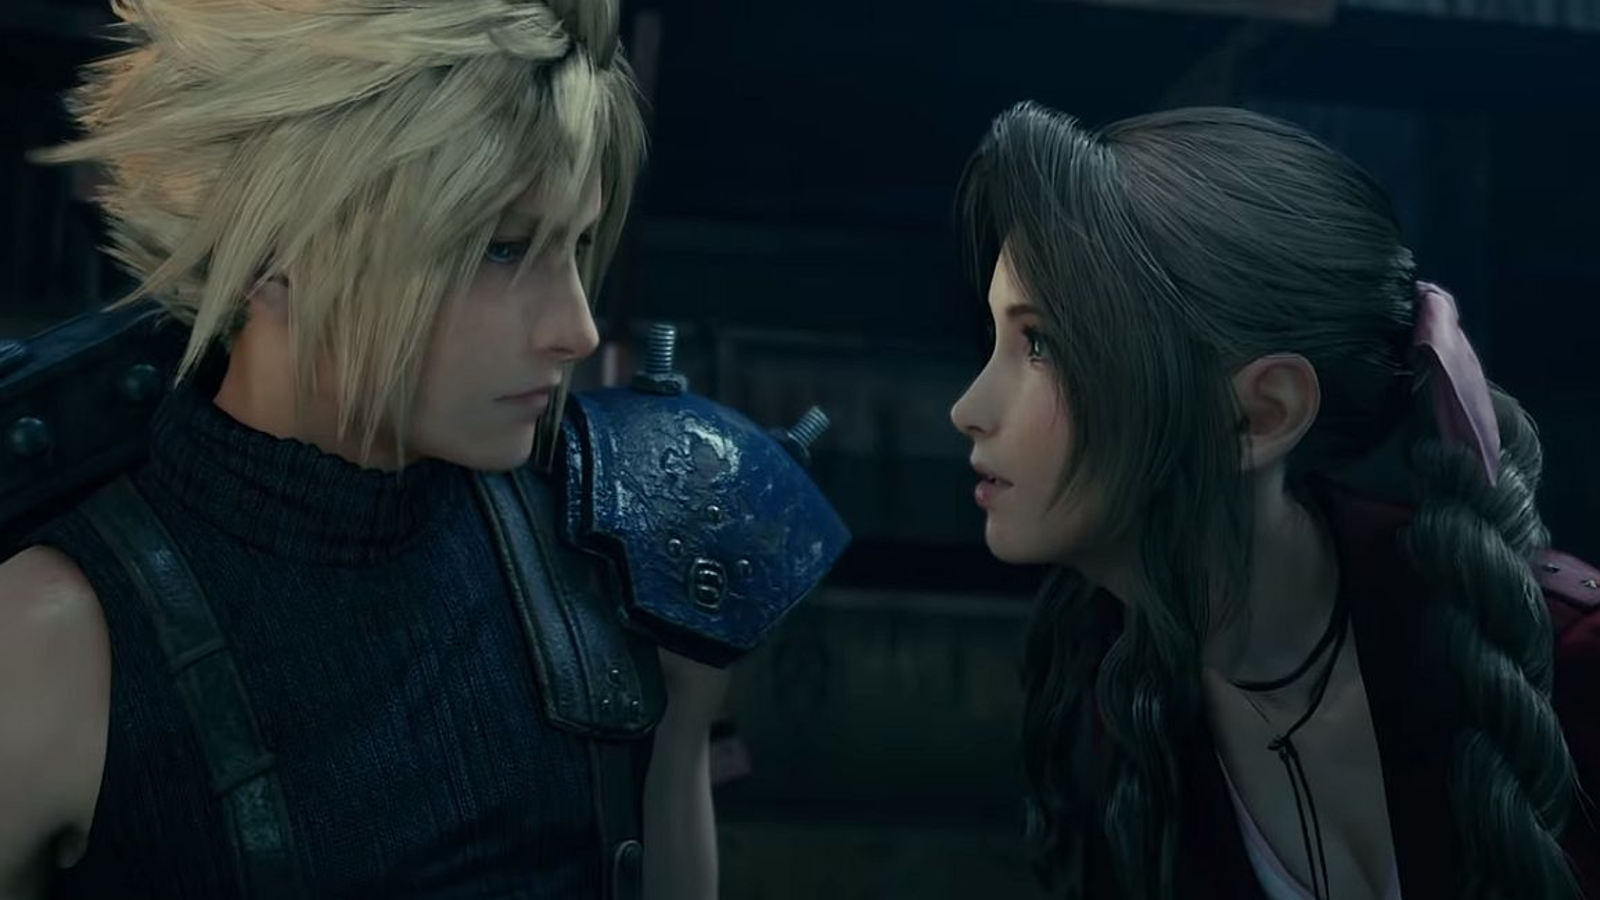 Square Enix says there's no need to replay Final Fantasy 7 Remake